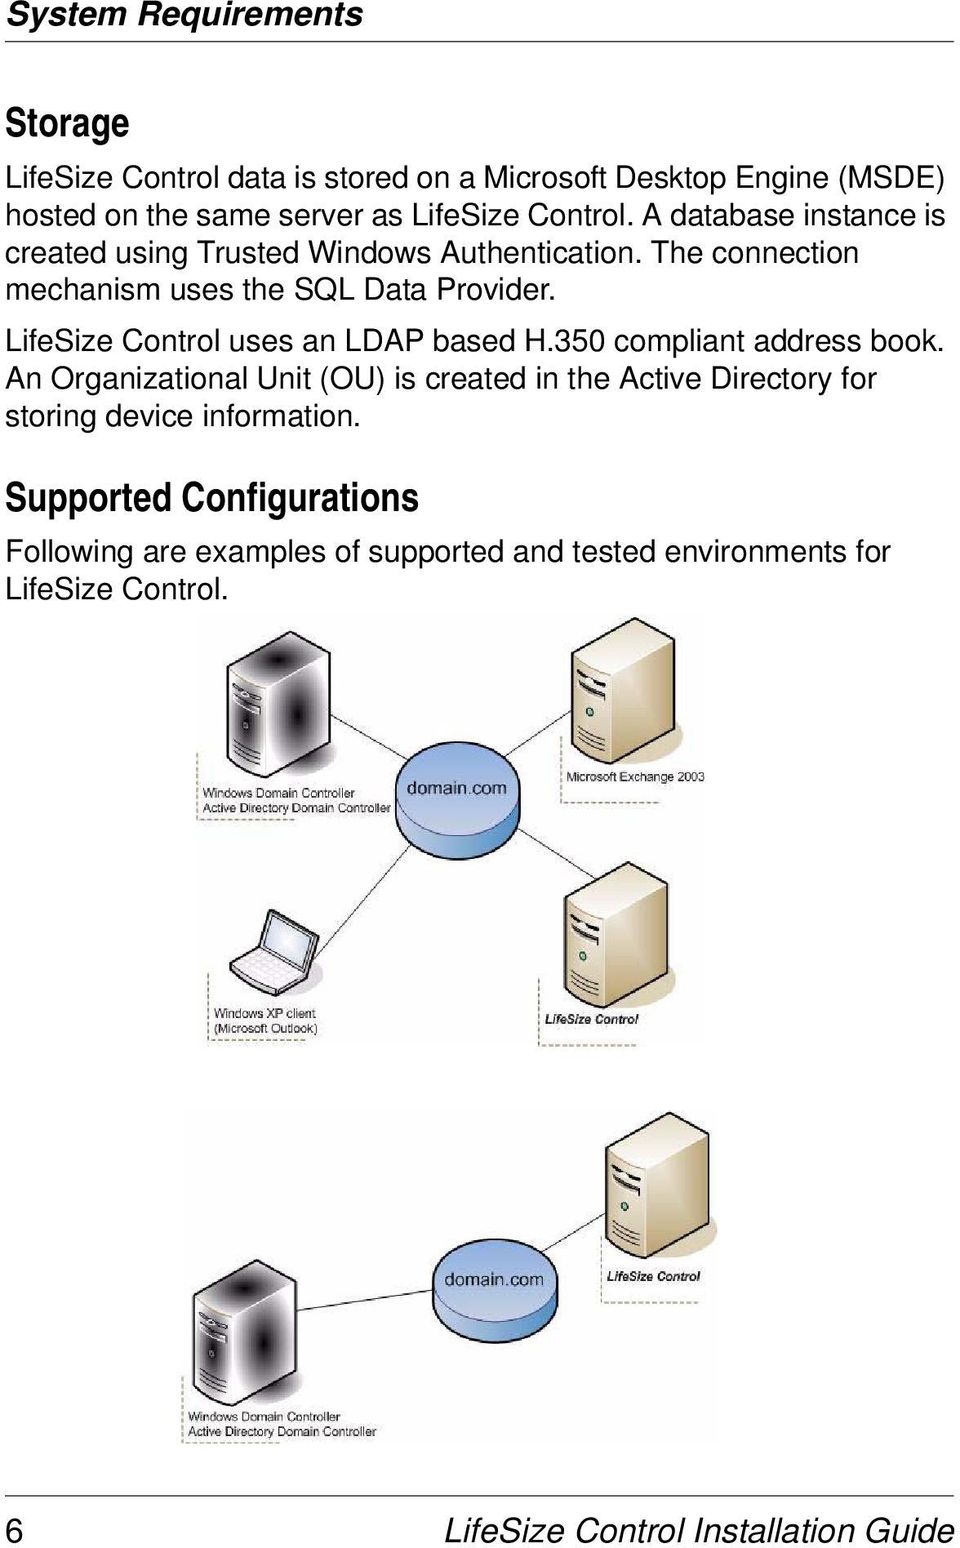 LifeSize Control uses an LDAP based H.350 compliant address book.